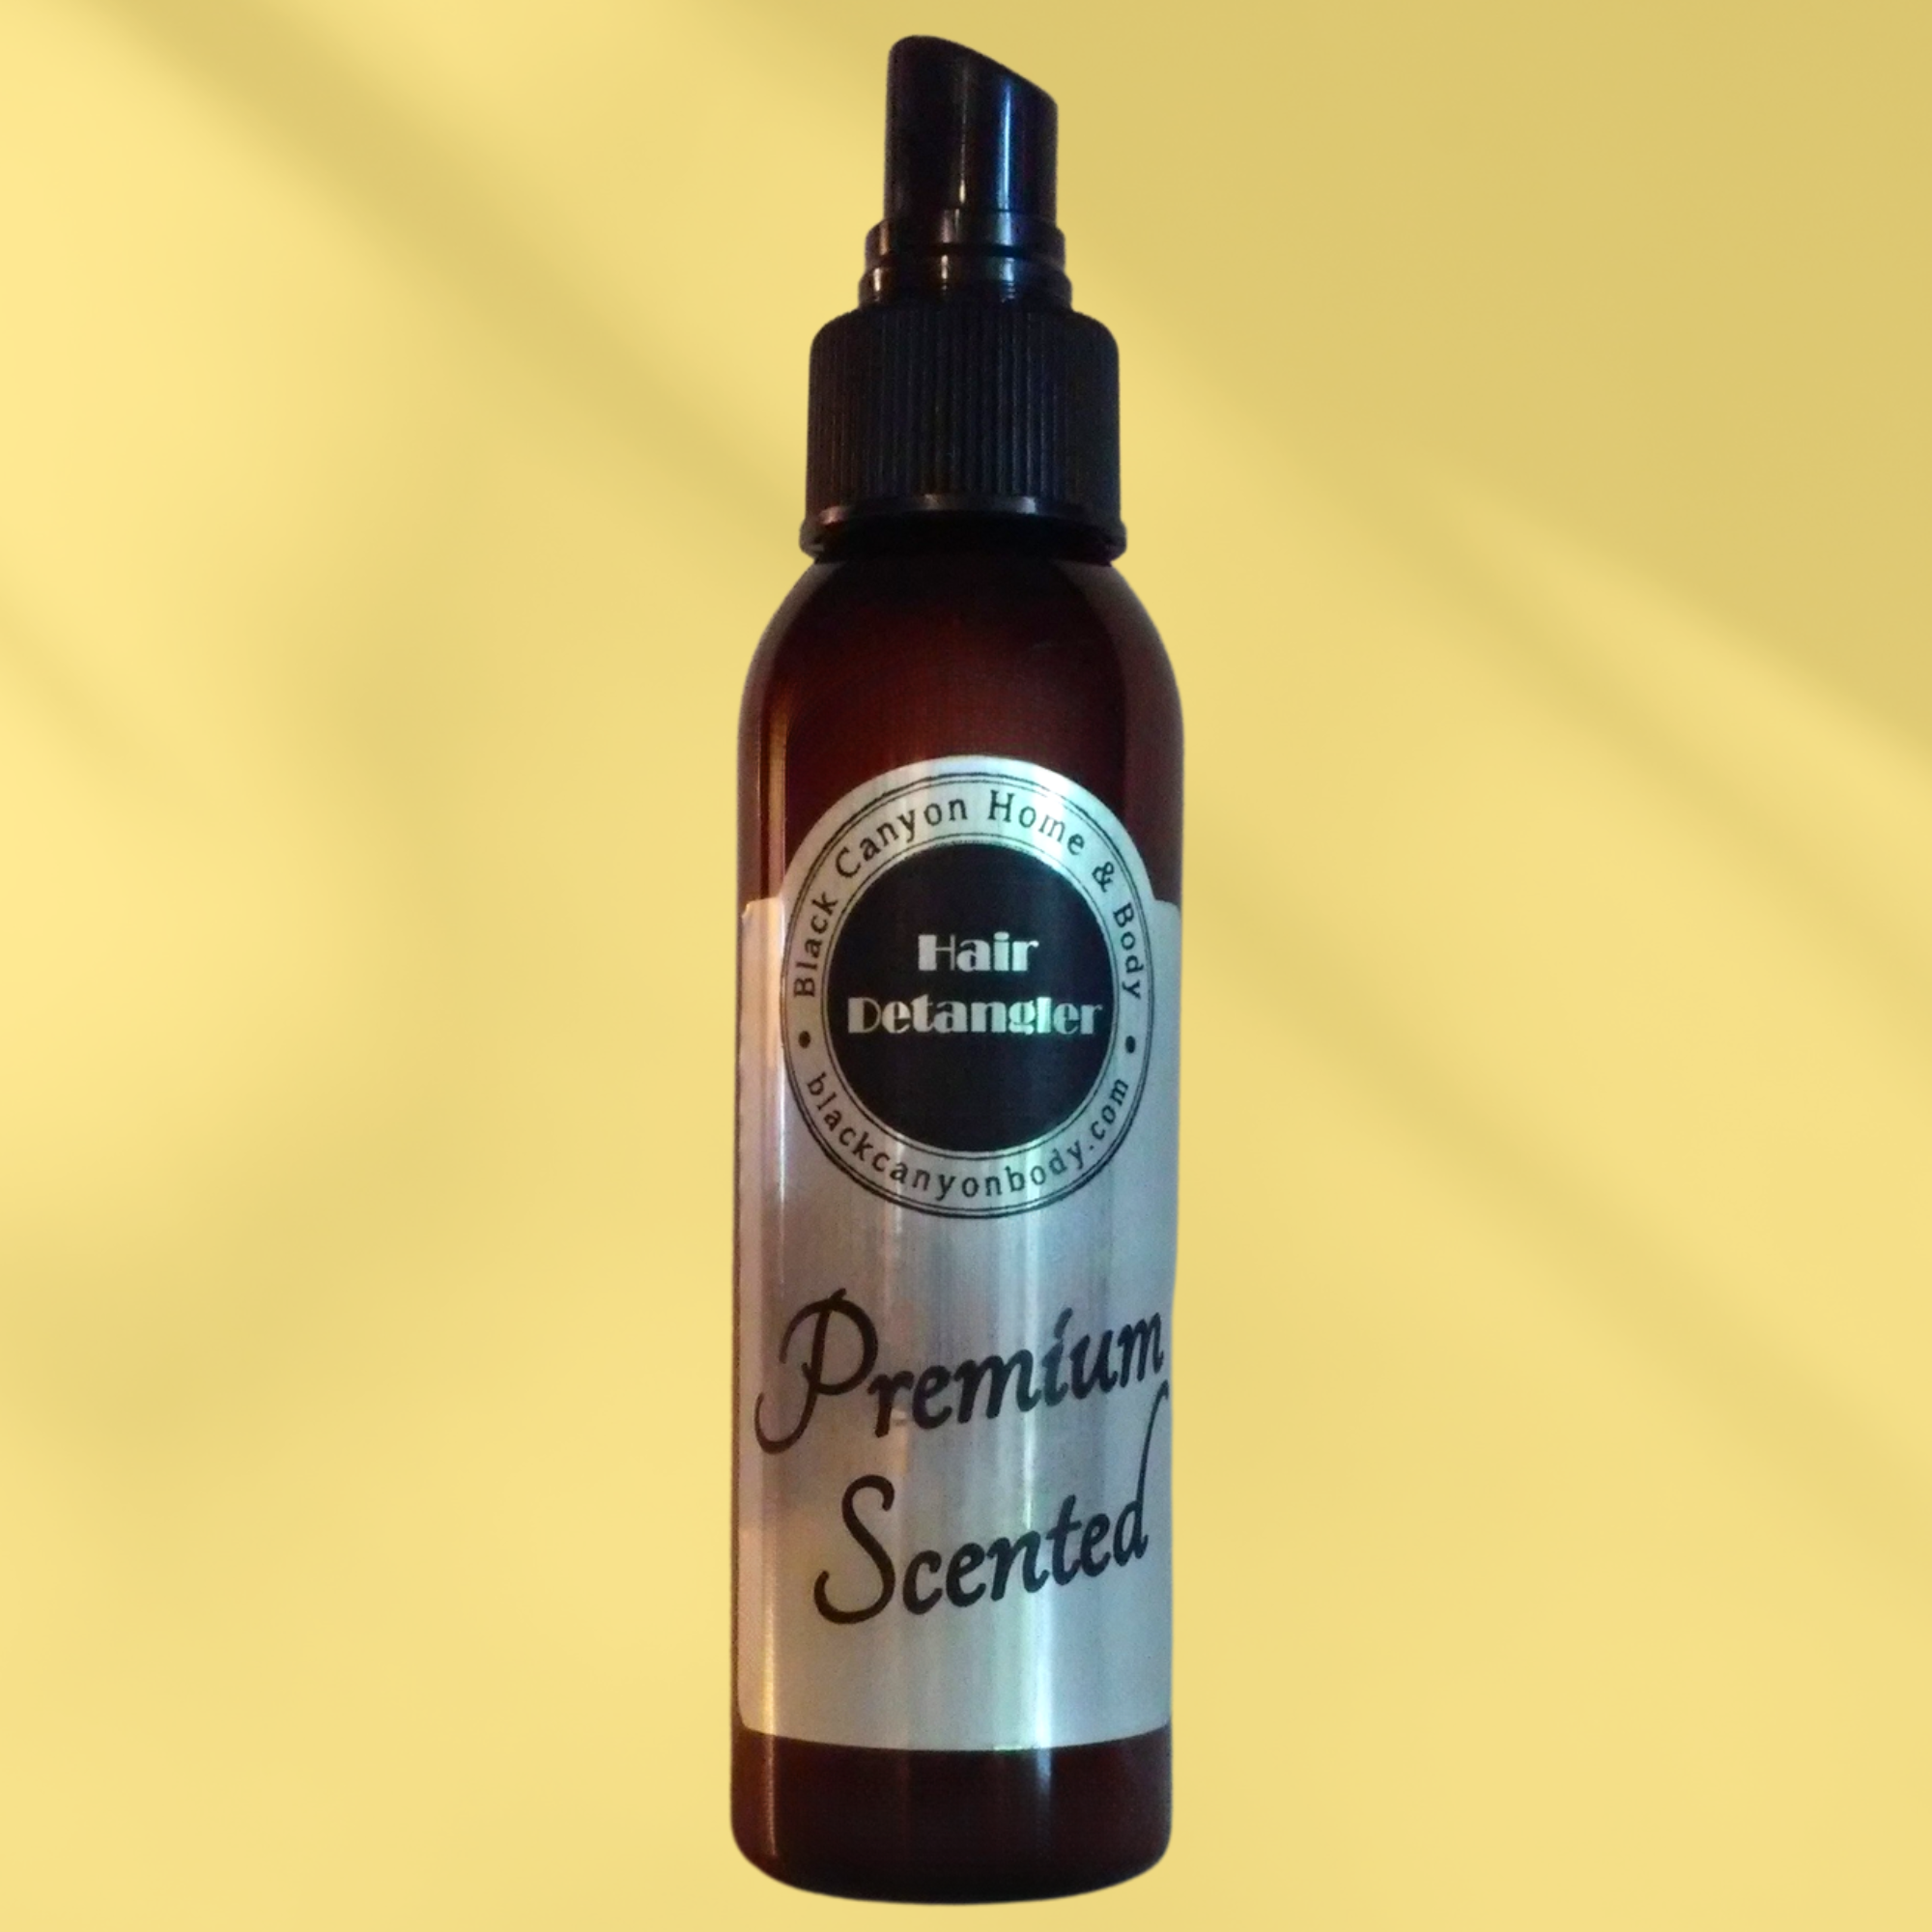 Black Canyon Chocolate Milk & Shea Scented Hair Detangler Spray with Olive Oil